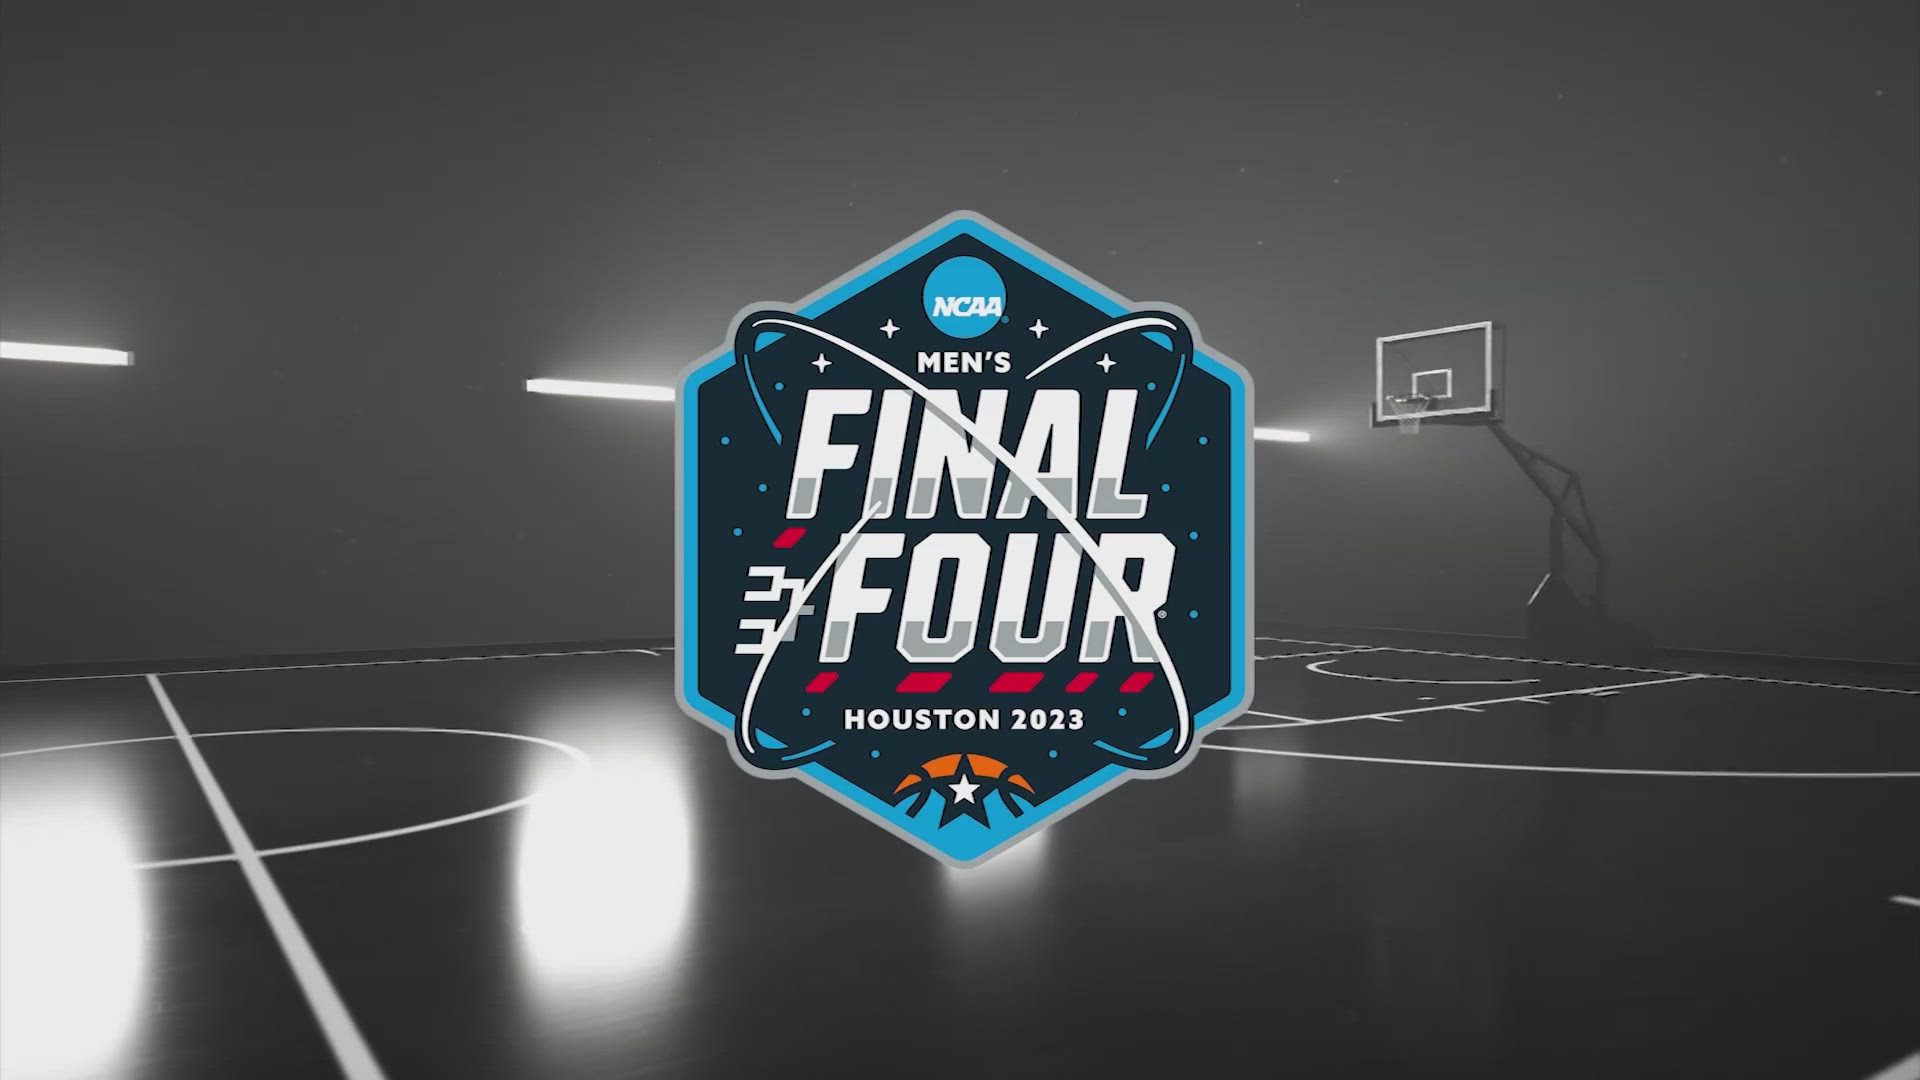 KHOU 11 is your home for the Men's Final Four!